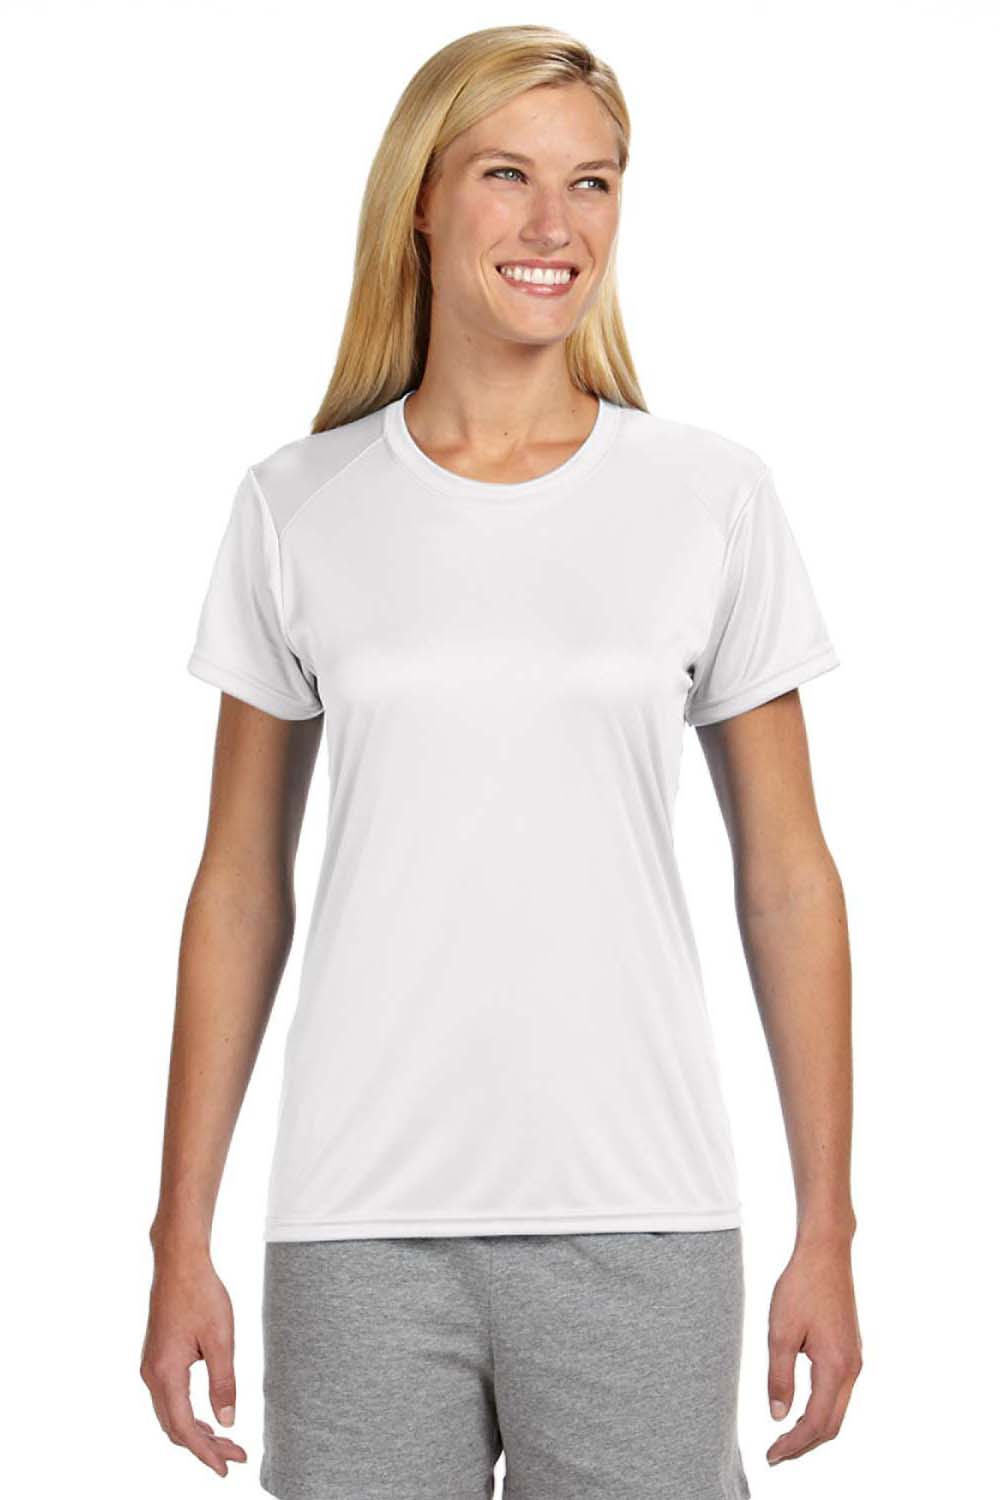 A4 NW3201 Womens Performance Moisture Wicking Short Sleeve Crewneck T-Shirt White Model Front